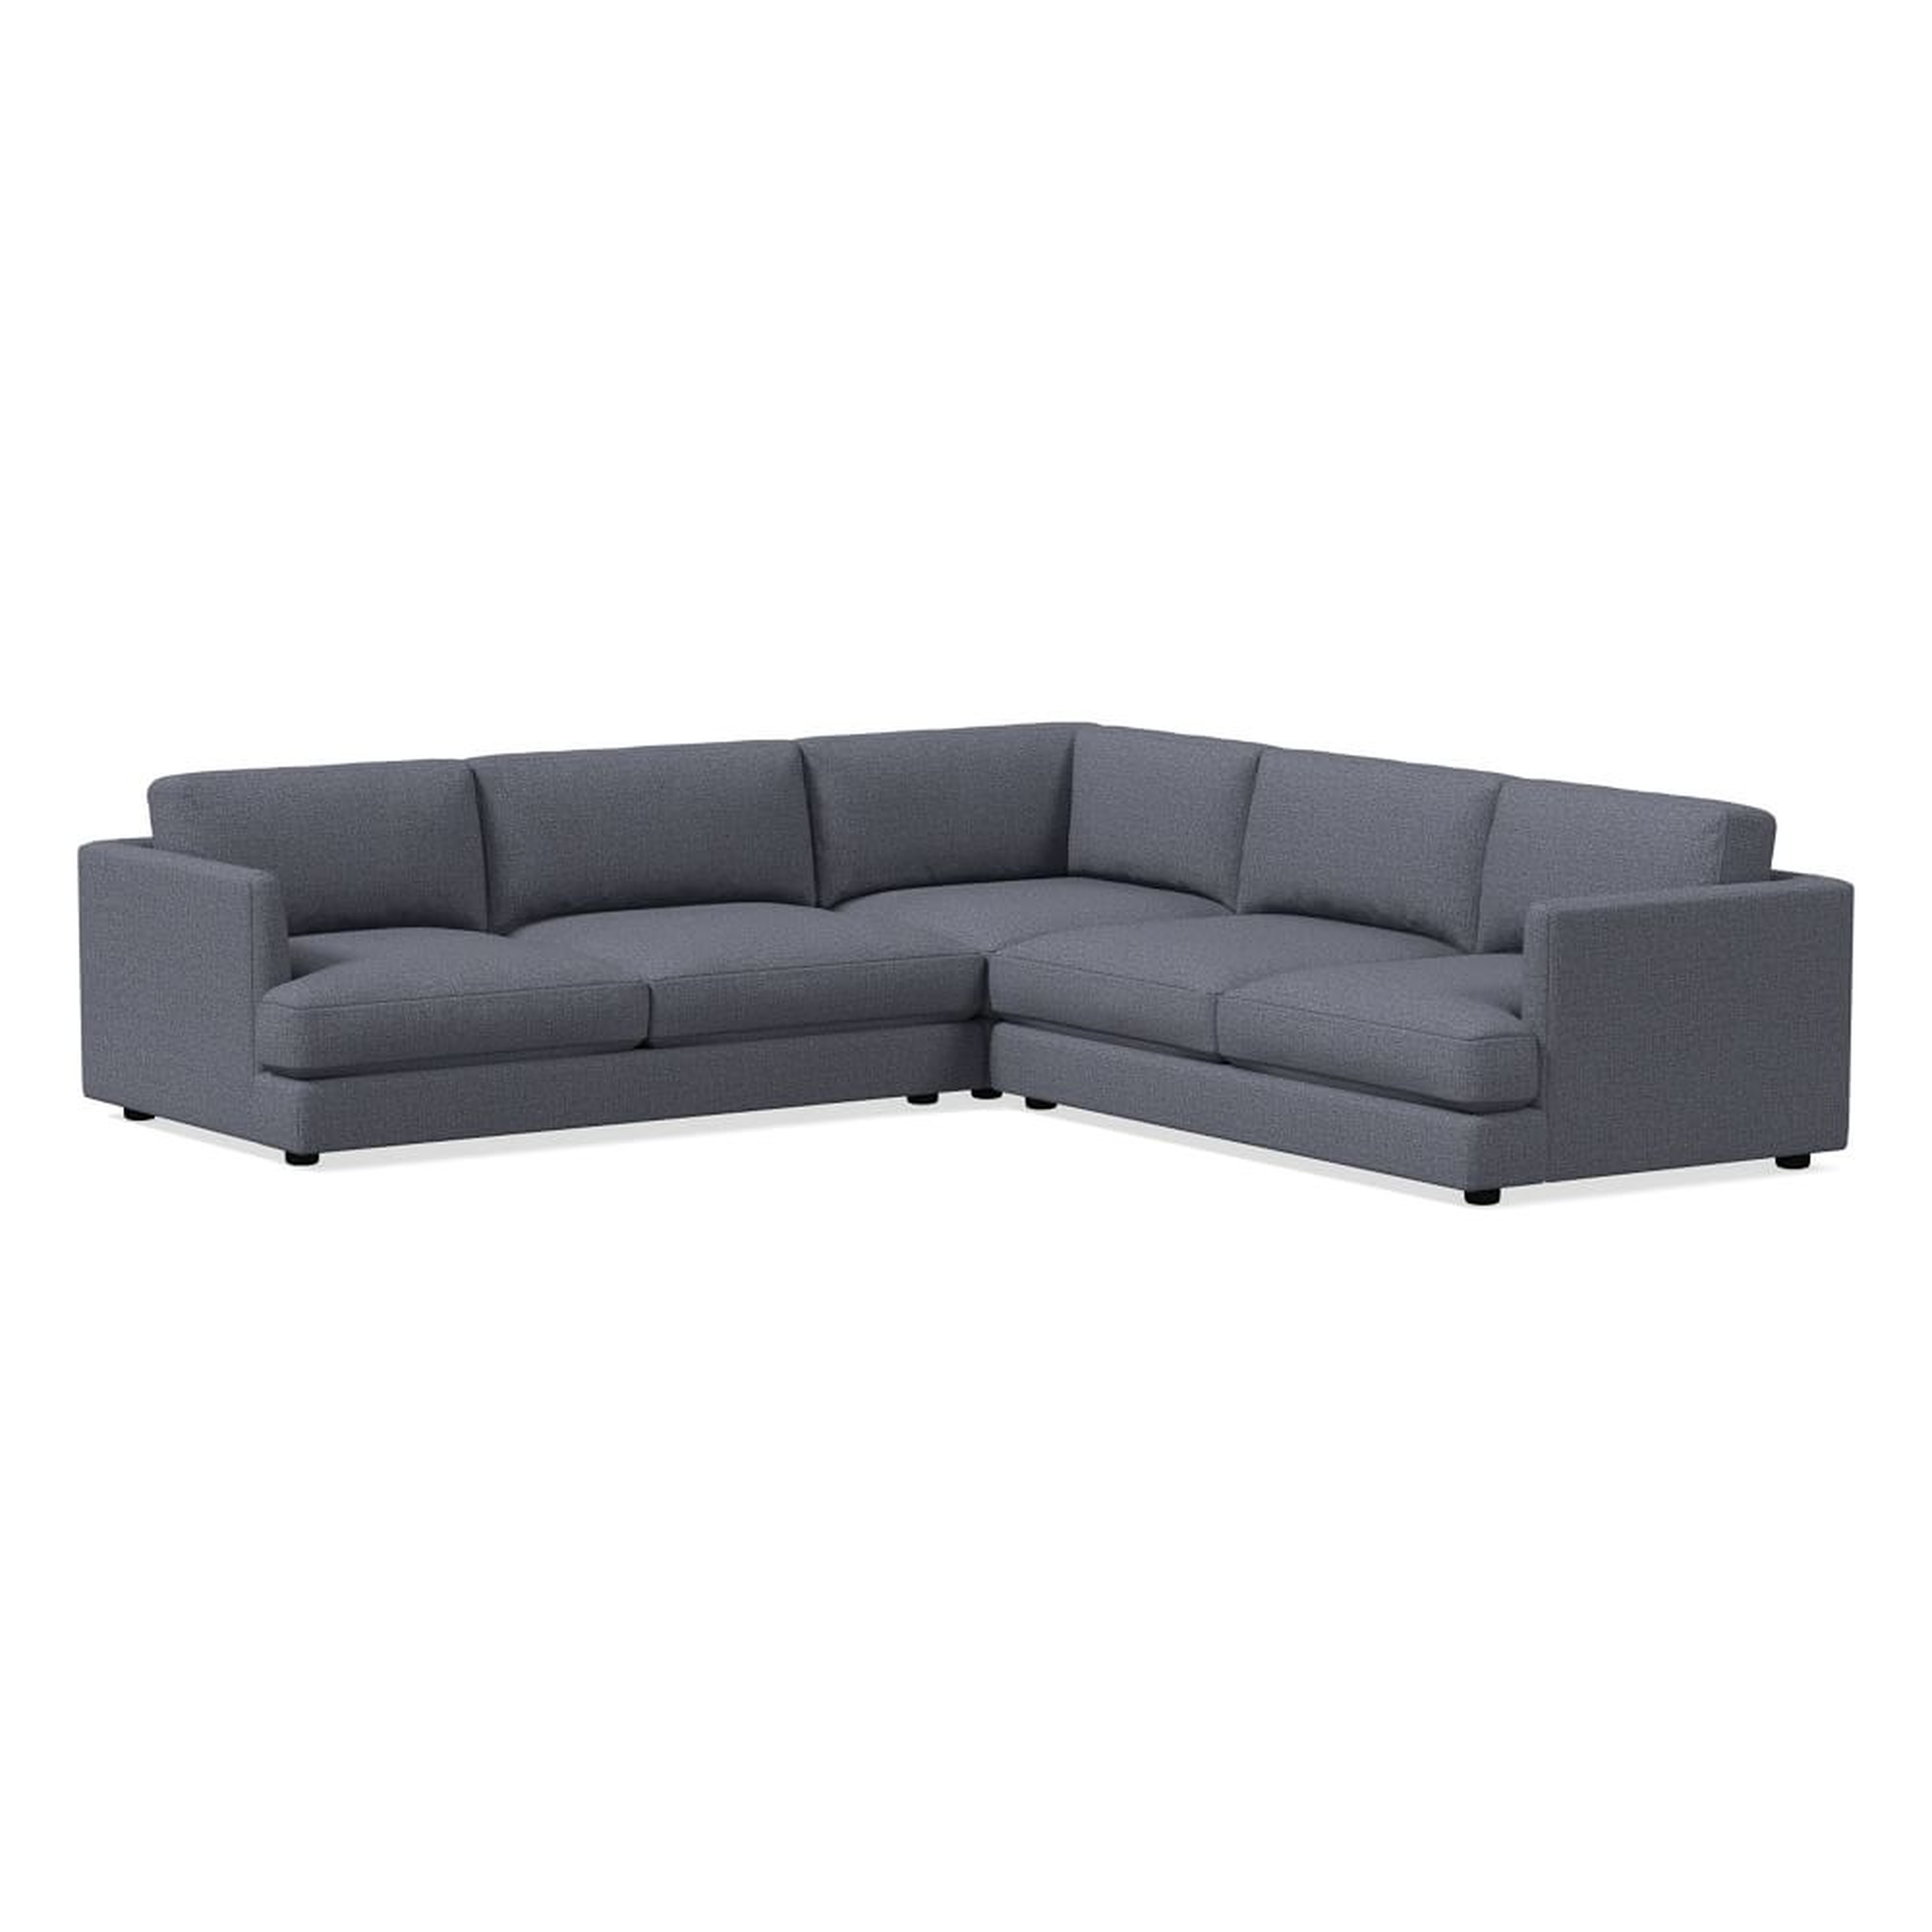 Haven 106" Multi Seat 3-Piece L-Shaped Sectional, Standard Depth, Yarn Dyed Linen Weave, graphite - West Elm